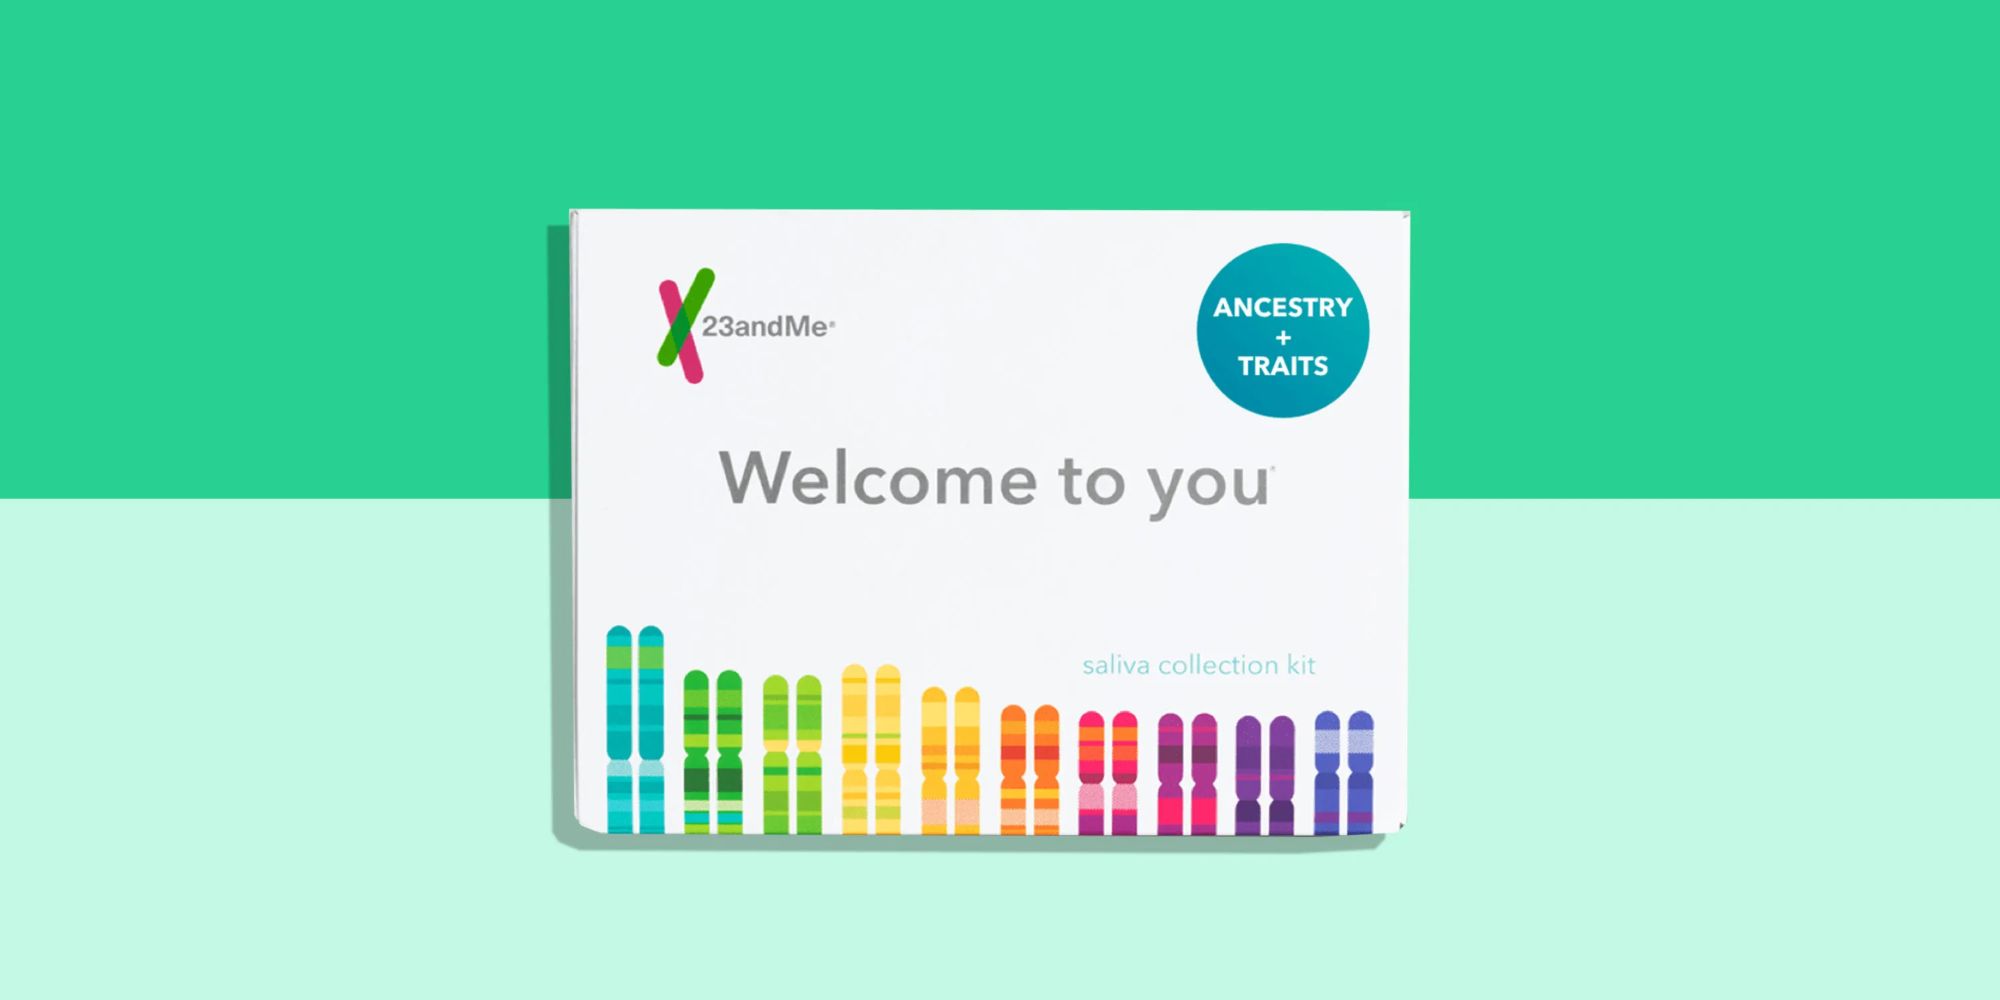 18-extraordinary-facts-about-23andme